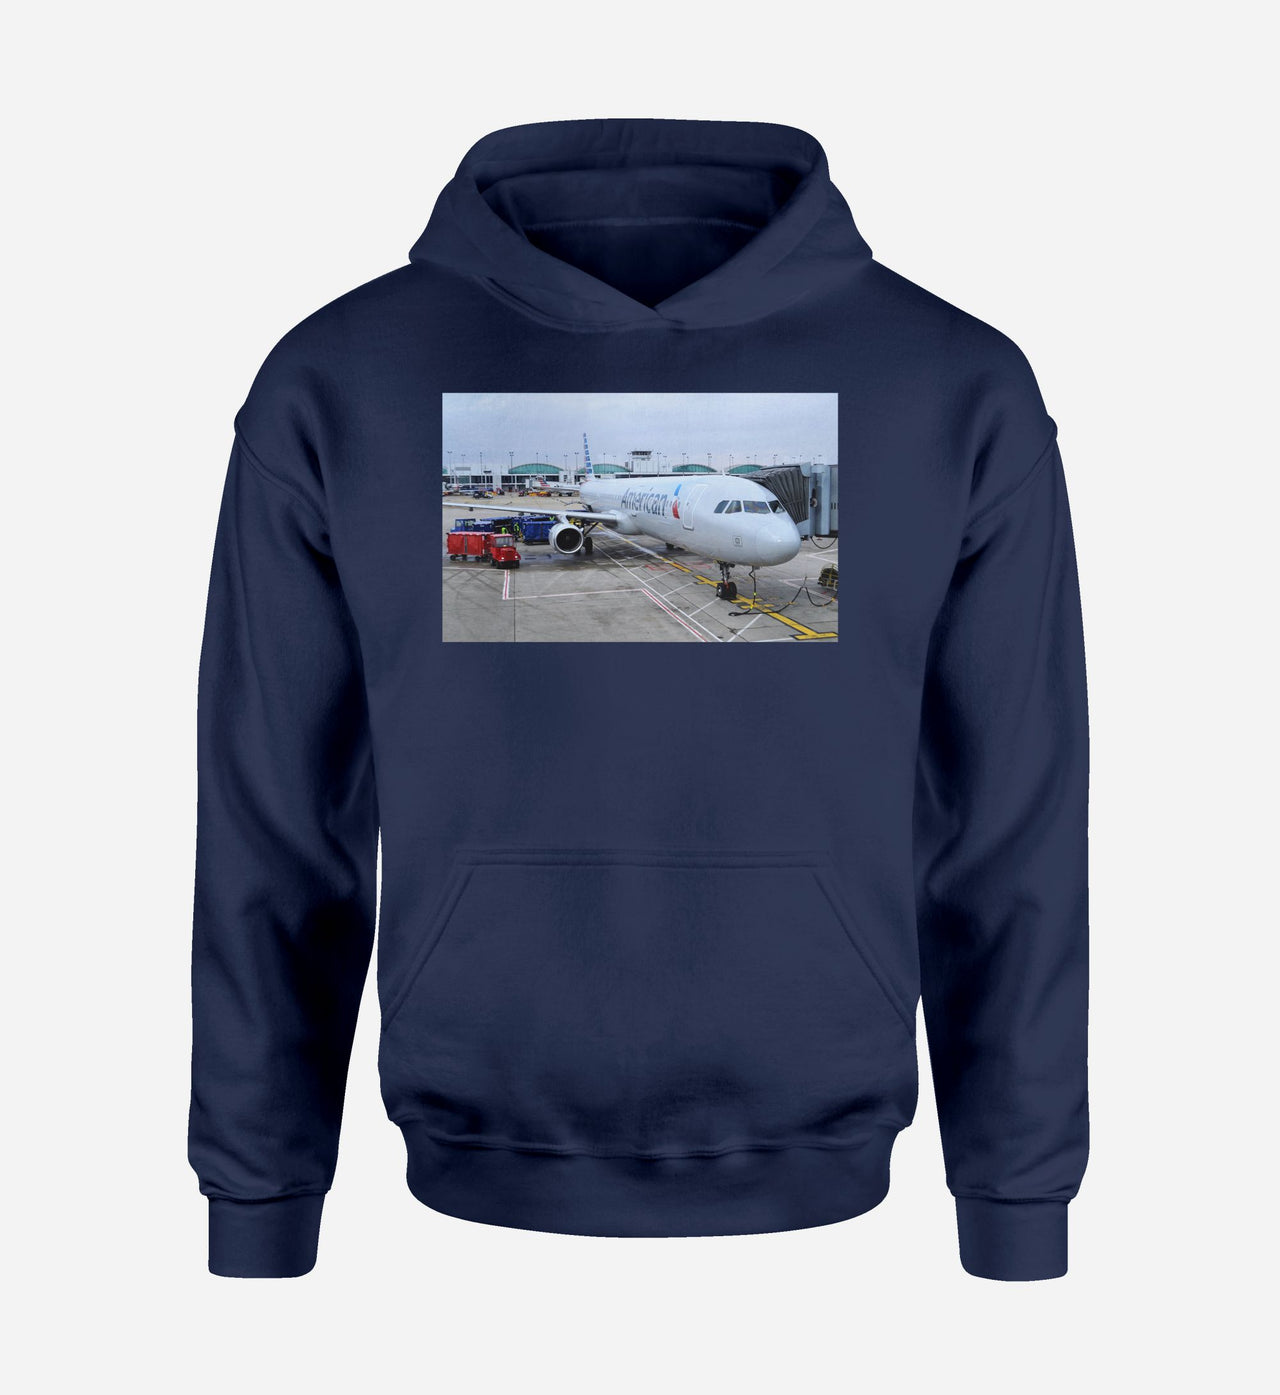 American Airlines A321 Designed Hoodies